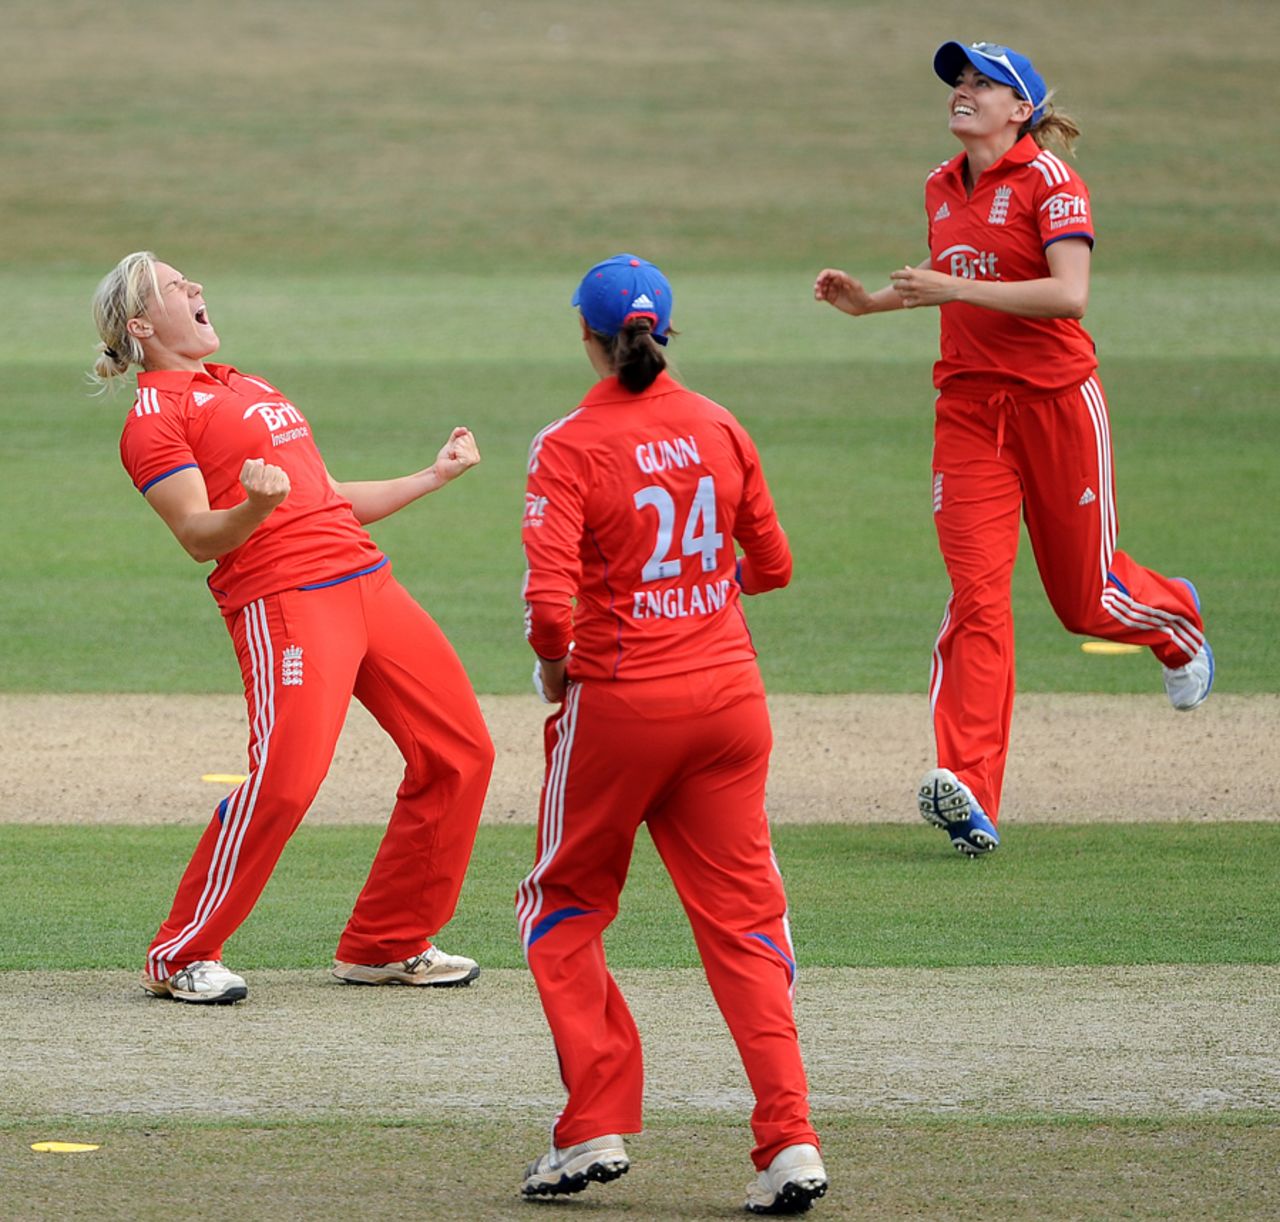 Katherine Brunt screams in delight at a wicket, England v Australia, 2nd women's ODI, Hove, August 23, 2013